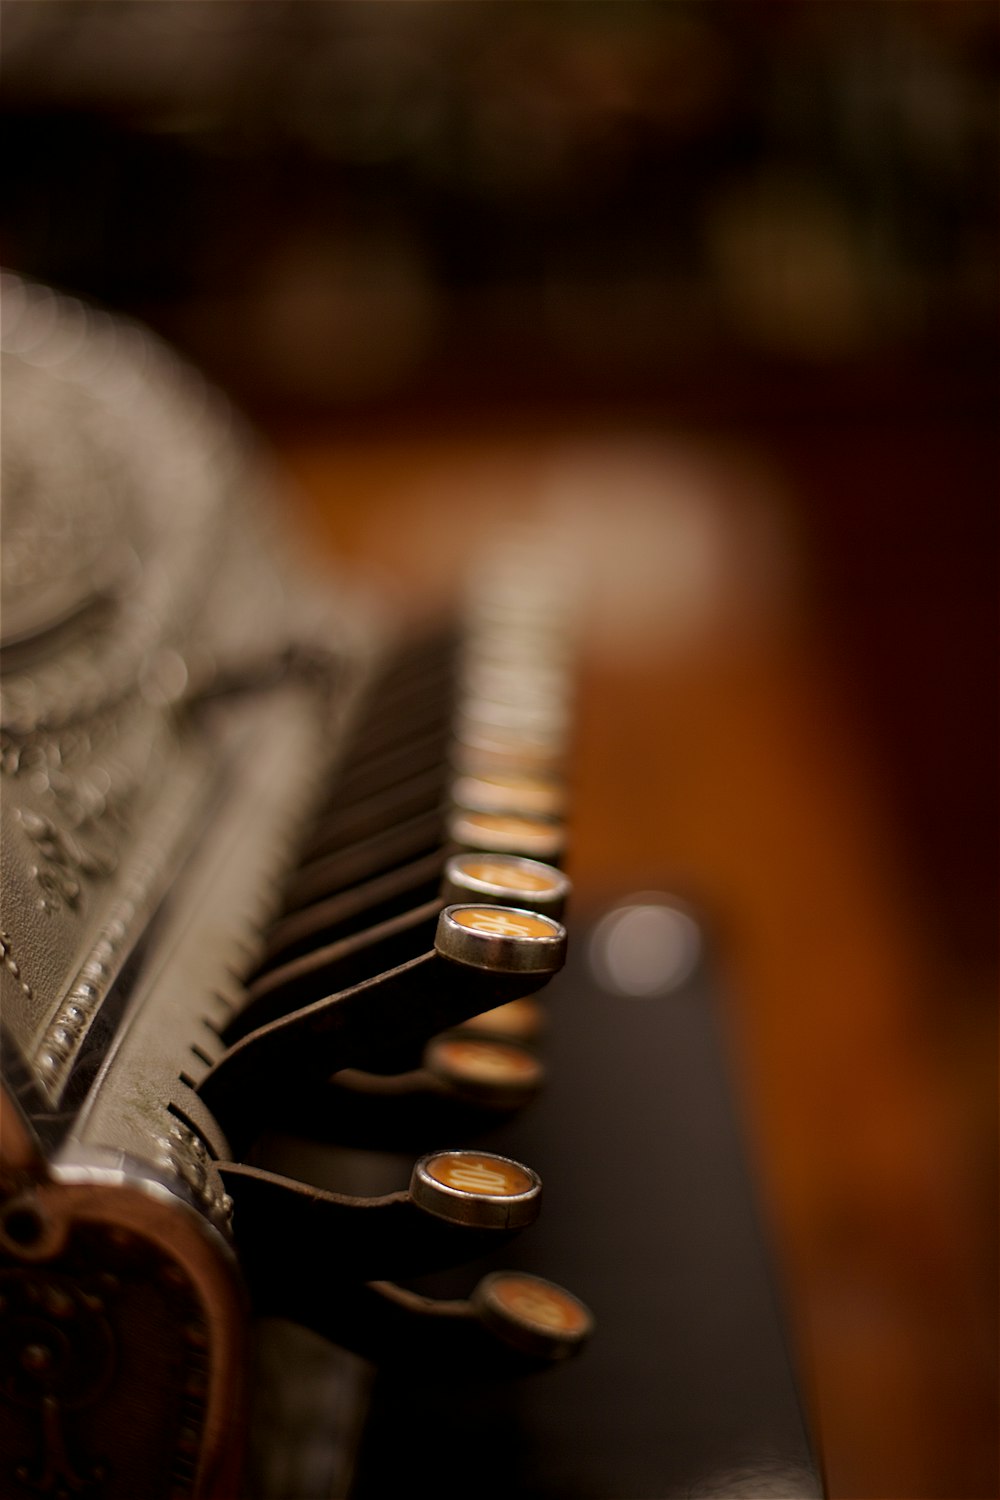 a close up of a musical instrument on a table